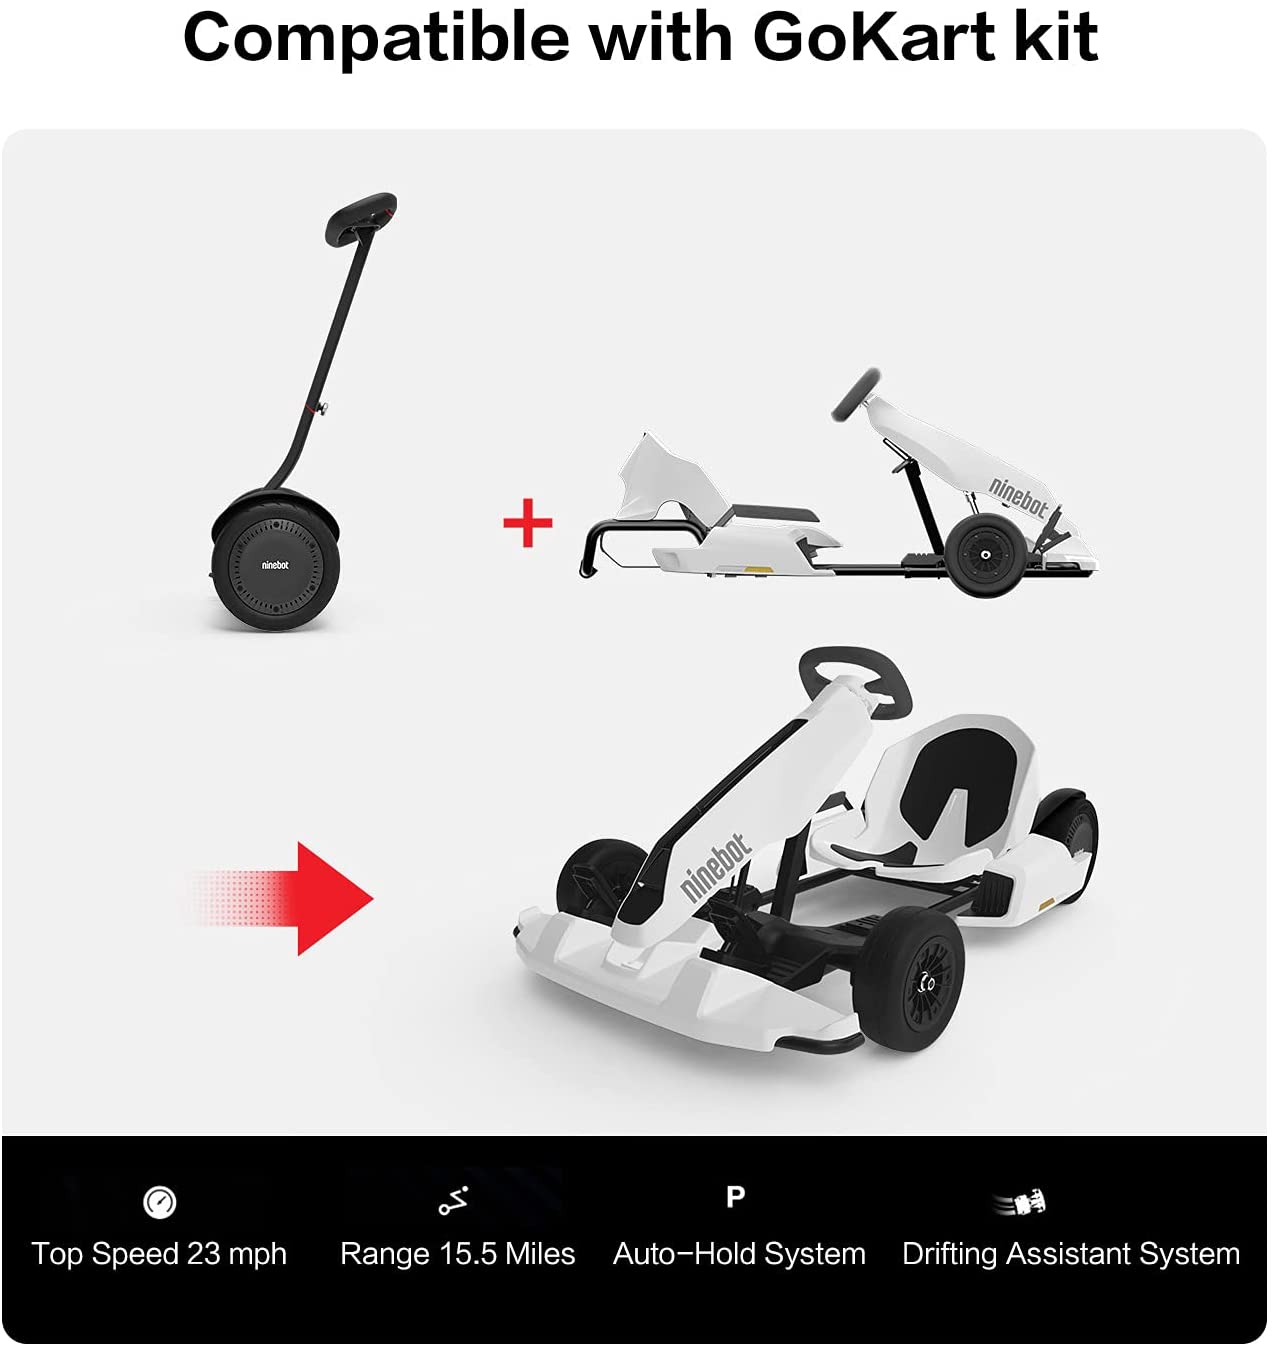 Segway Ninebot S Max Smart Self-Balancing Electric Scooter with